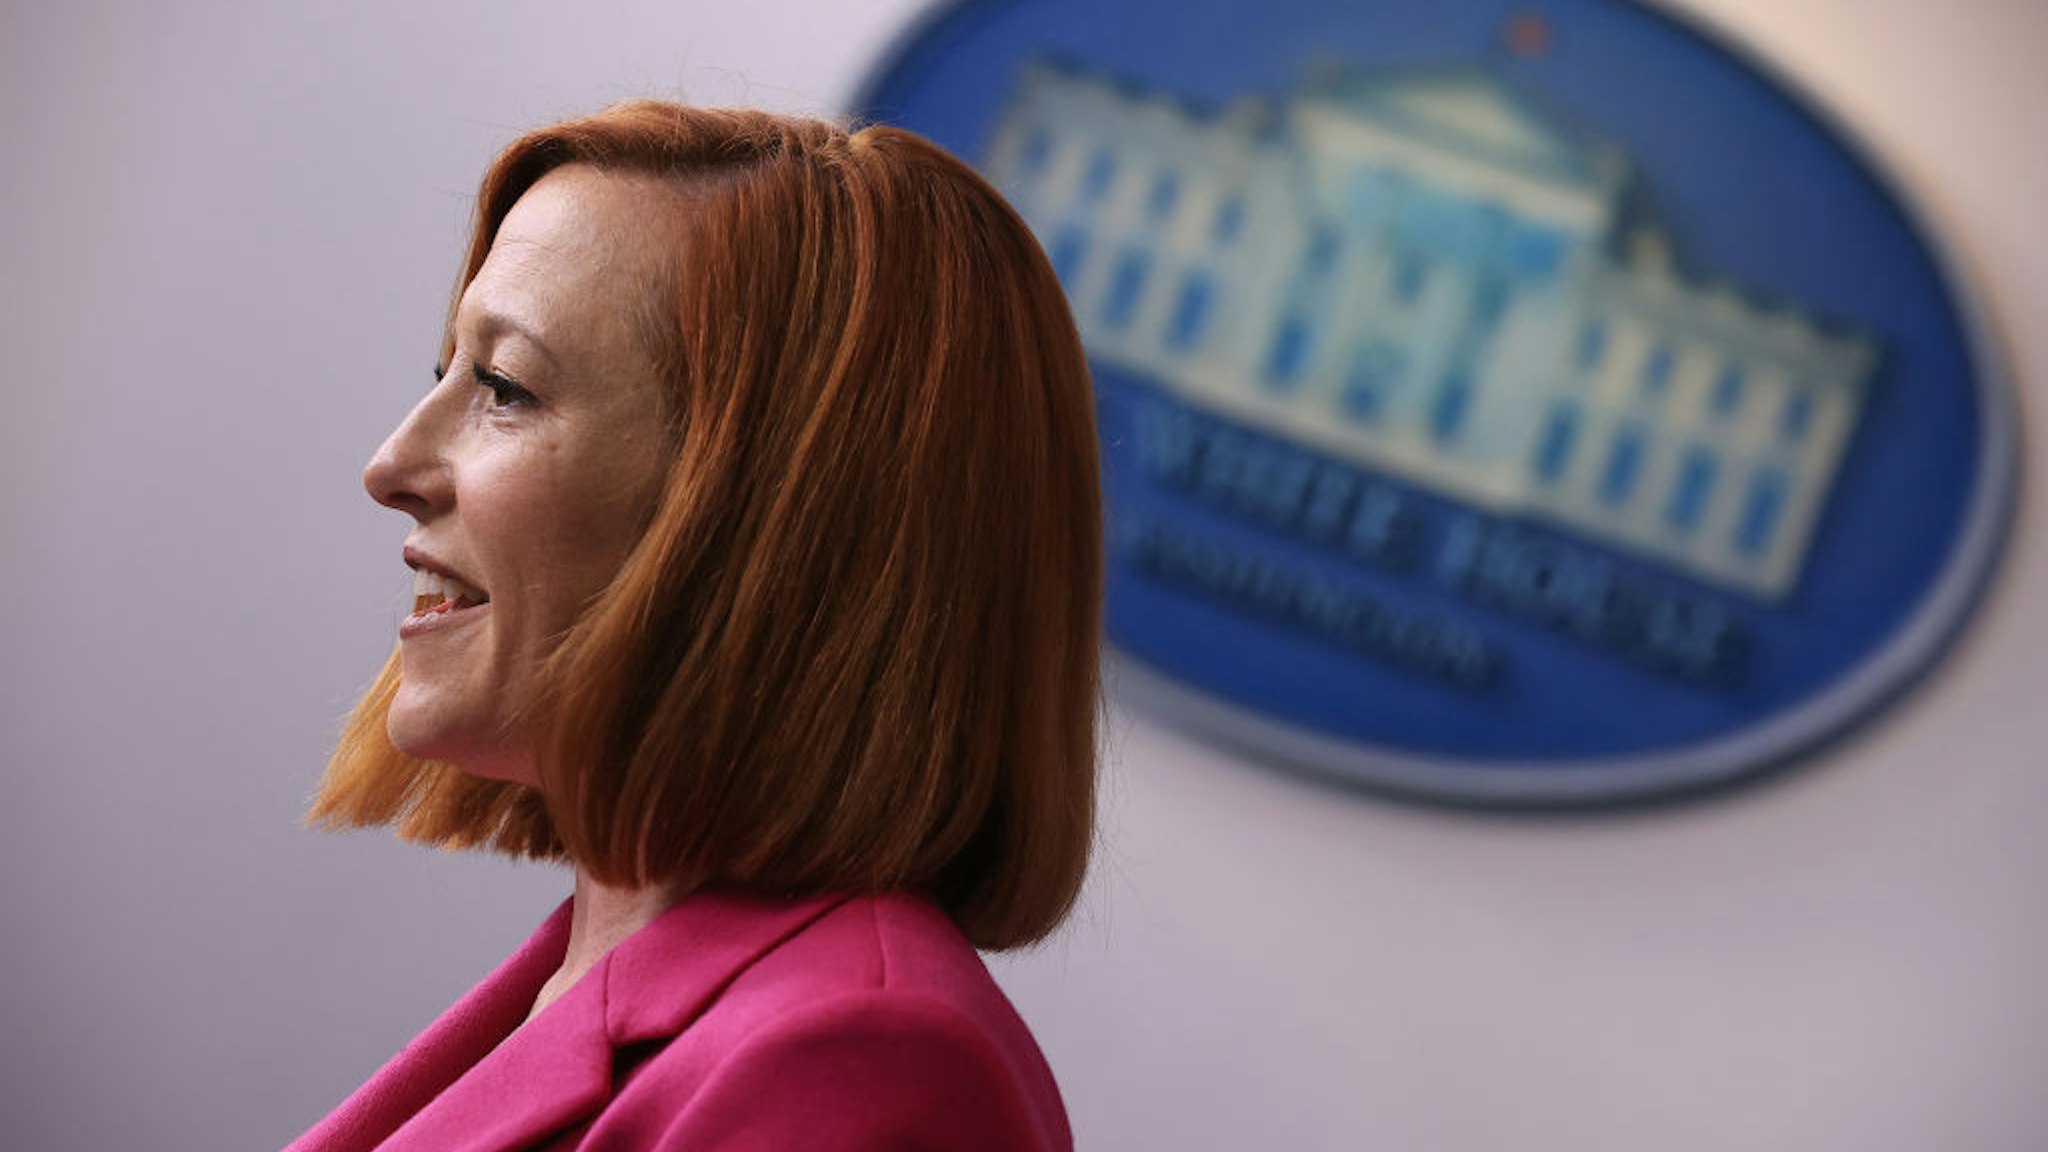 White House Press Secretary Jen Psaki talks to reporters in the Brady Press Briefing Room at the White House on October 22, 2021 in Washington, DC.